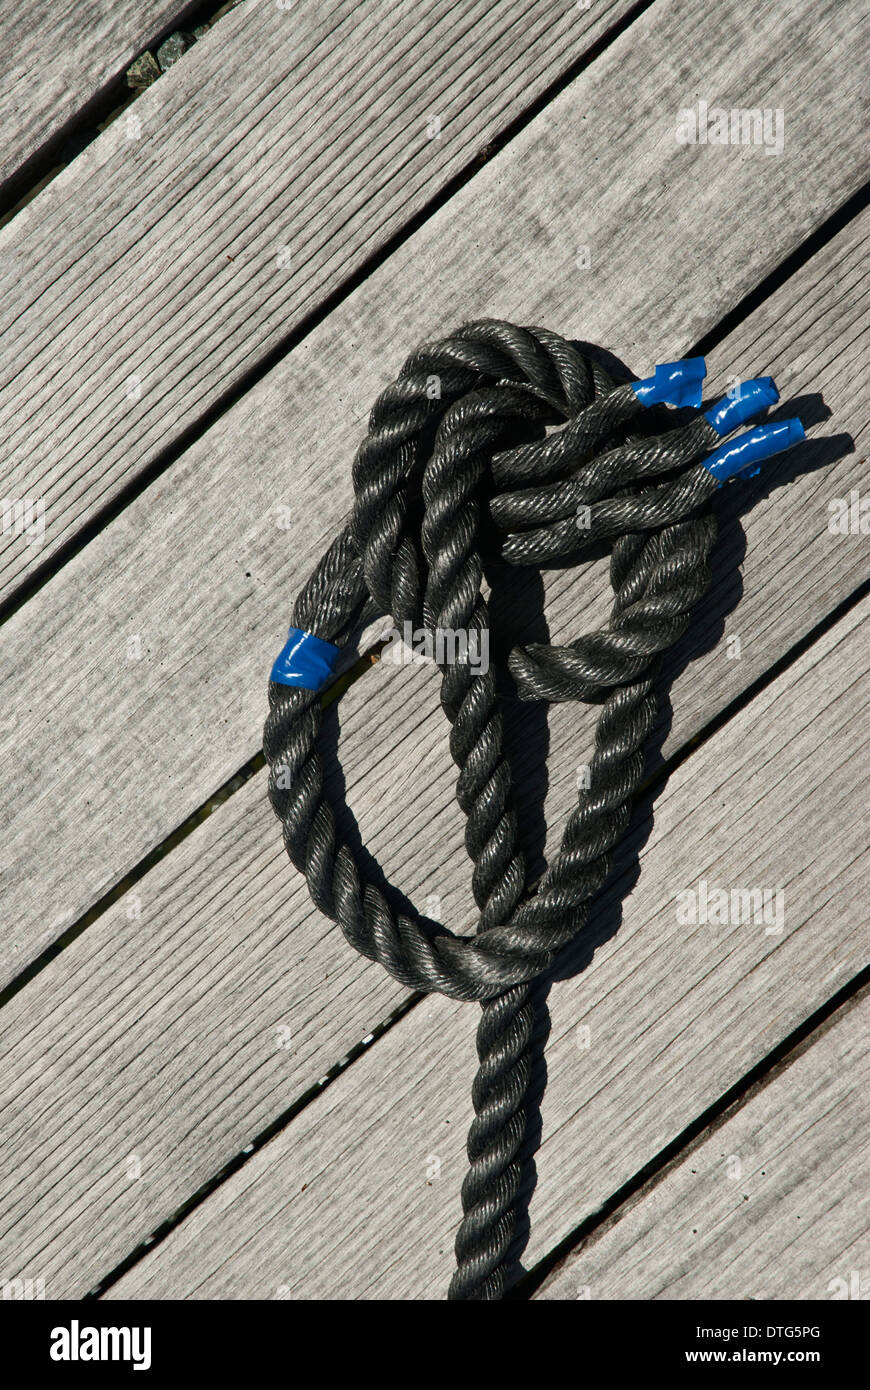 Black rope with blue tie offs on wooden slats of a jetty Stock Photo